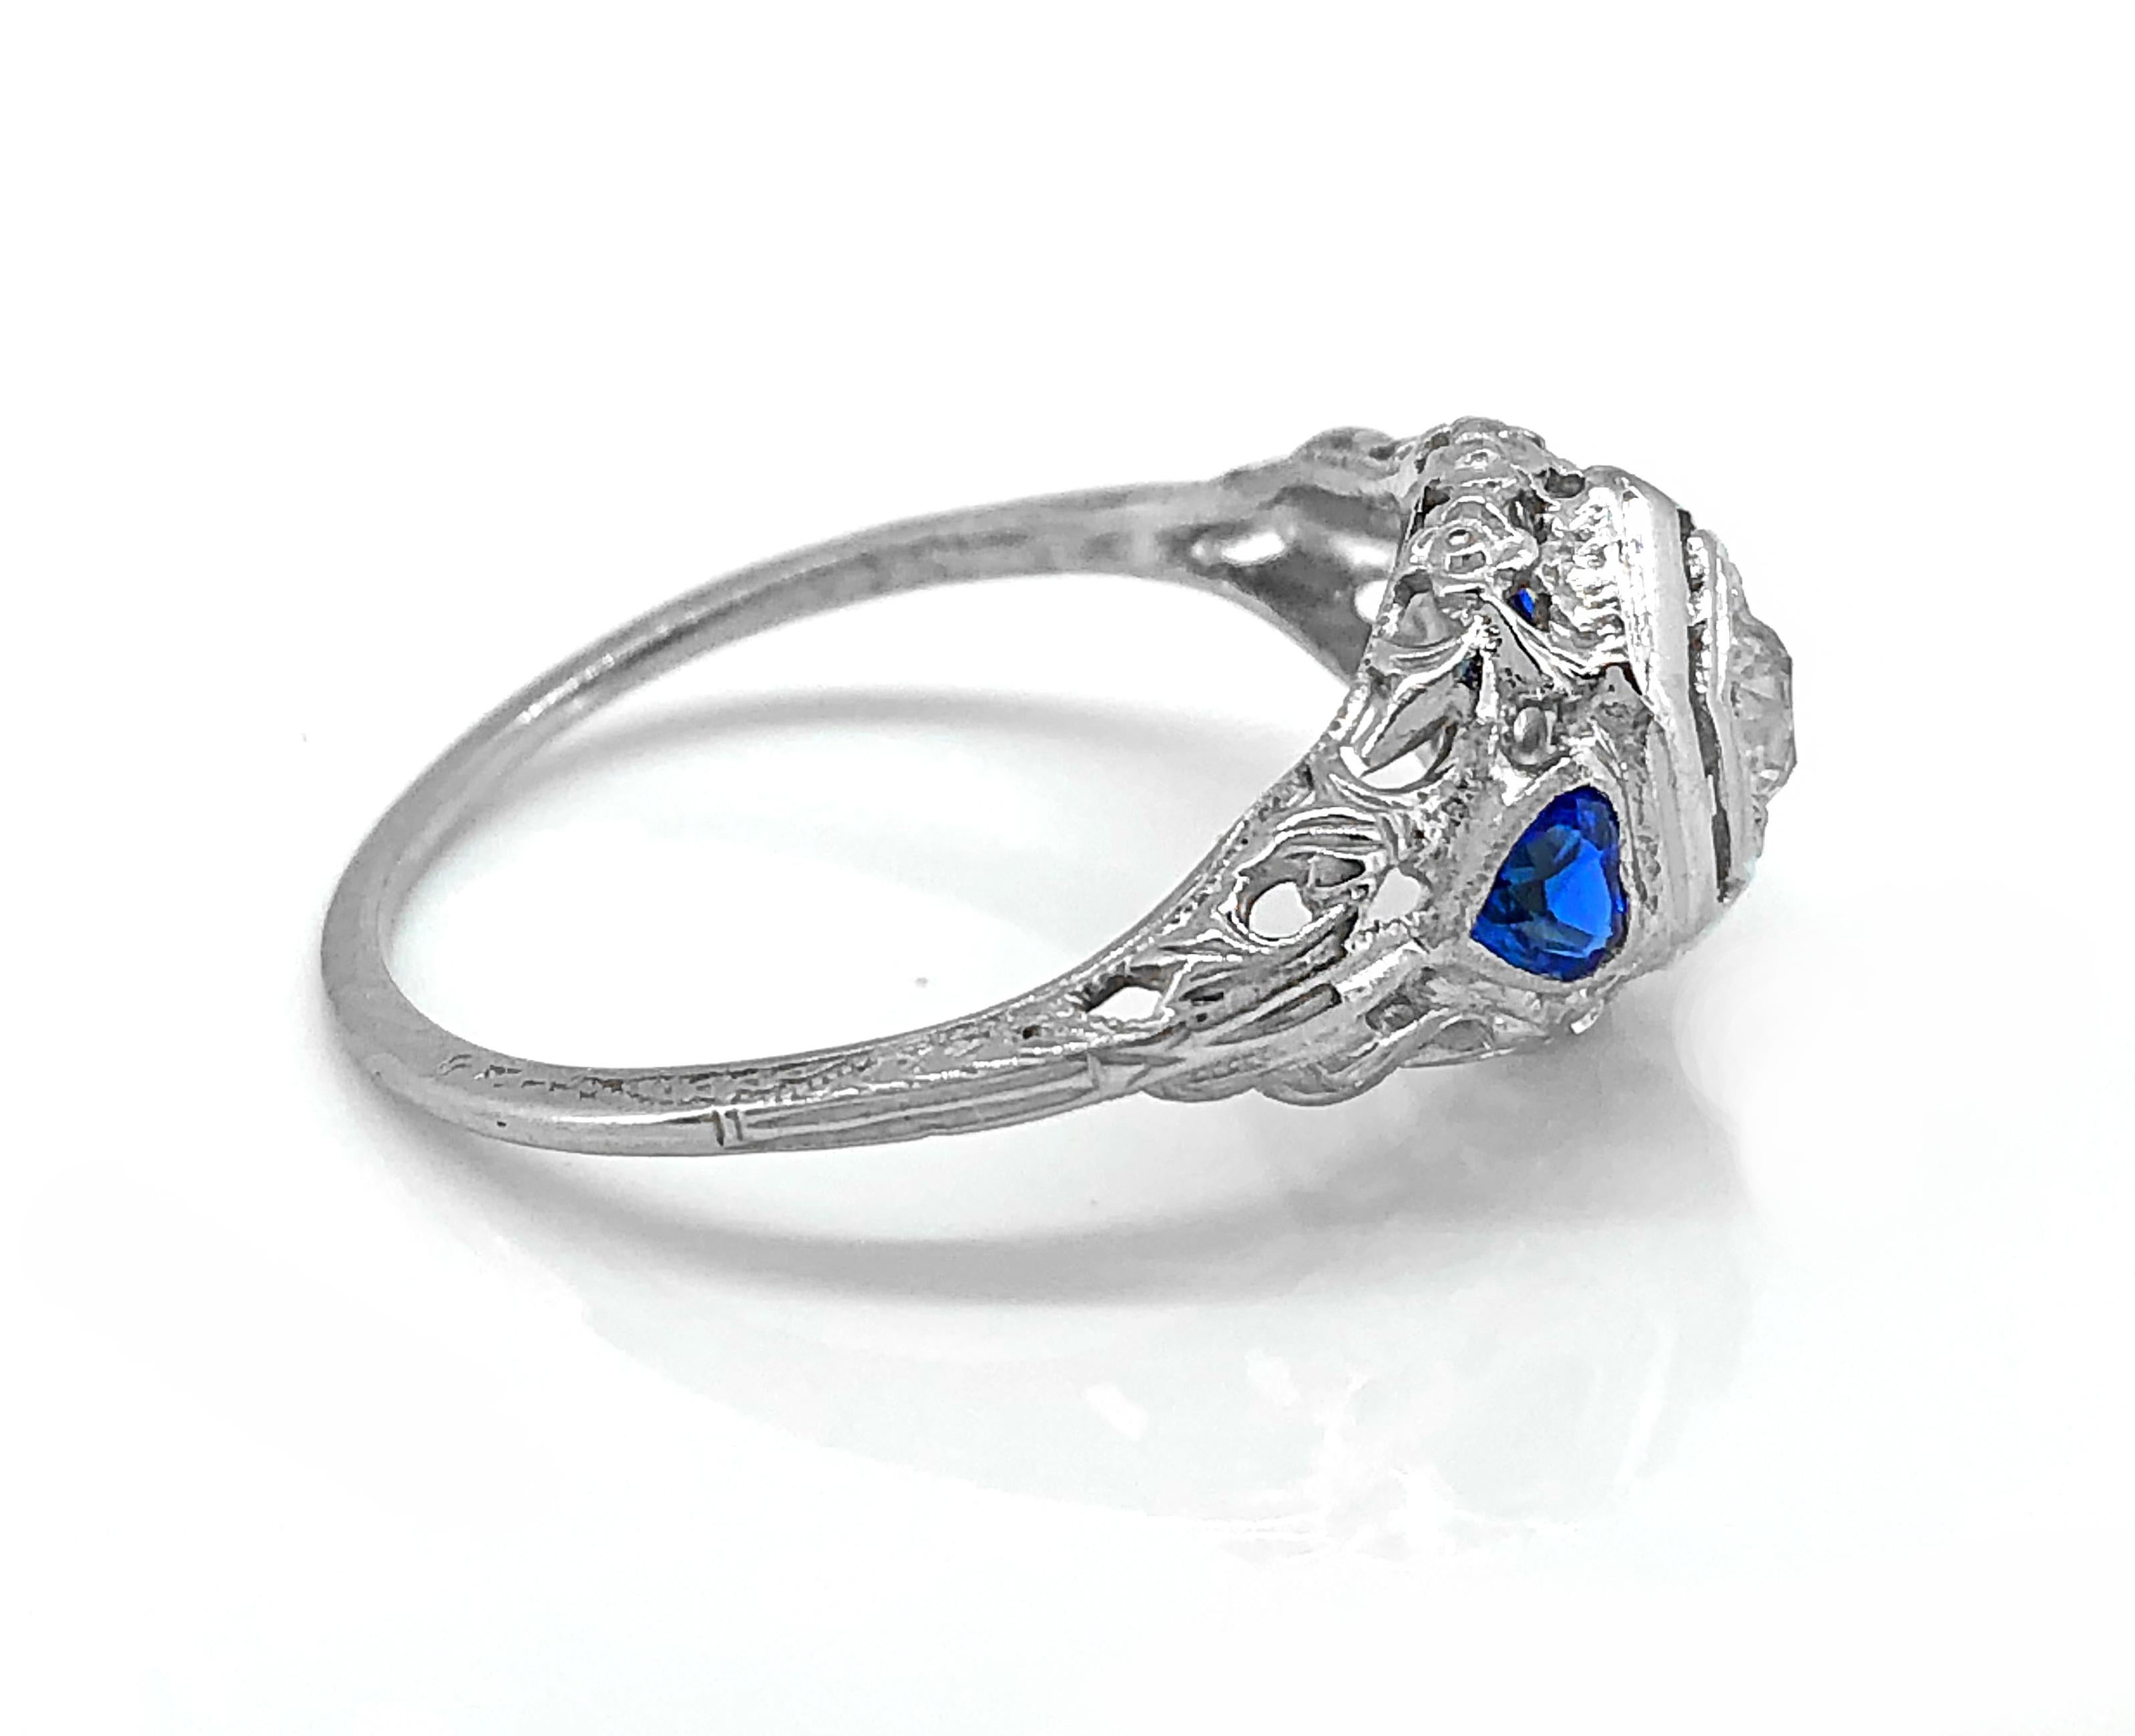 A sweet Edwardian diamond and sapphire Antique engagement ring featuring approximately .20ct. Apx. T.W. of European cut diamonds with VS2 clarity and H color and approximately .40ct. Apx. T.W. of synthetic heart shaped blue sapphires. The beautiful